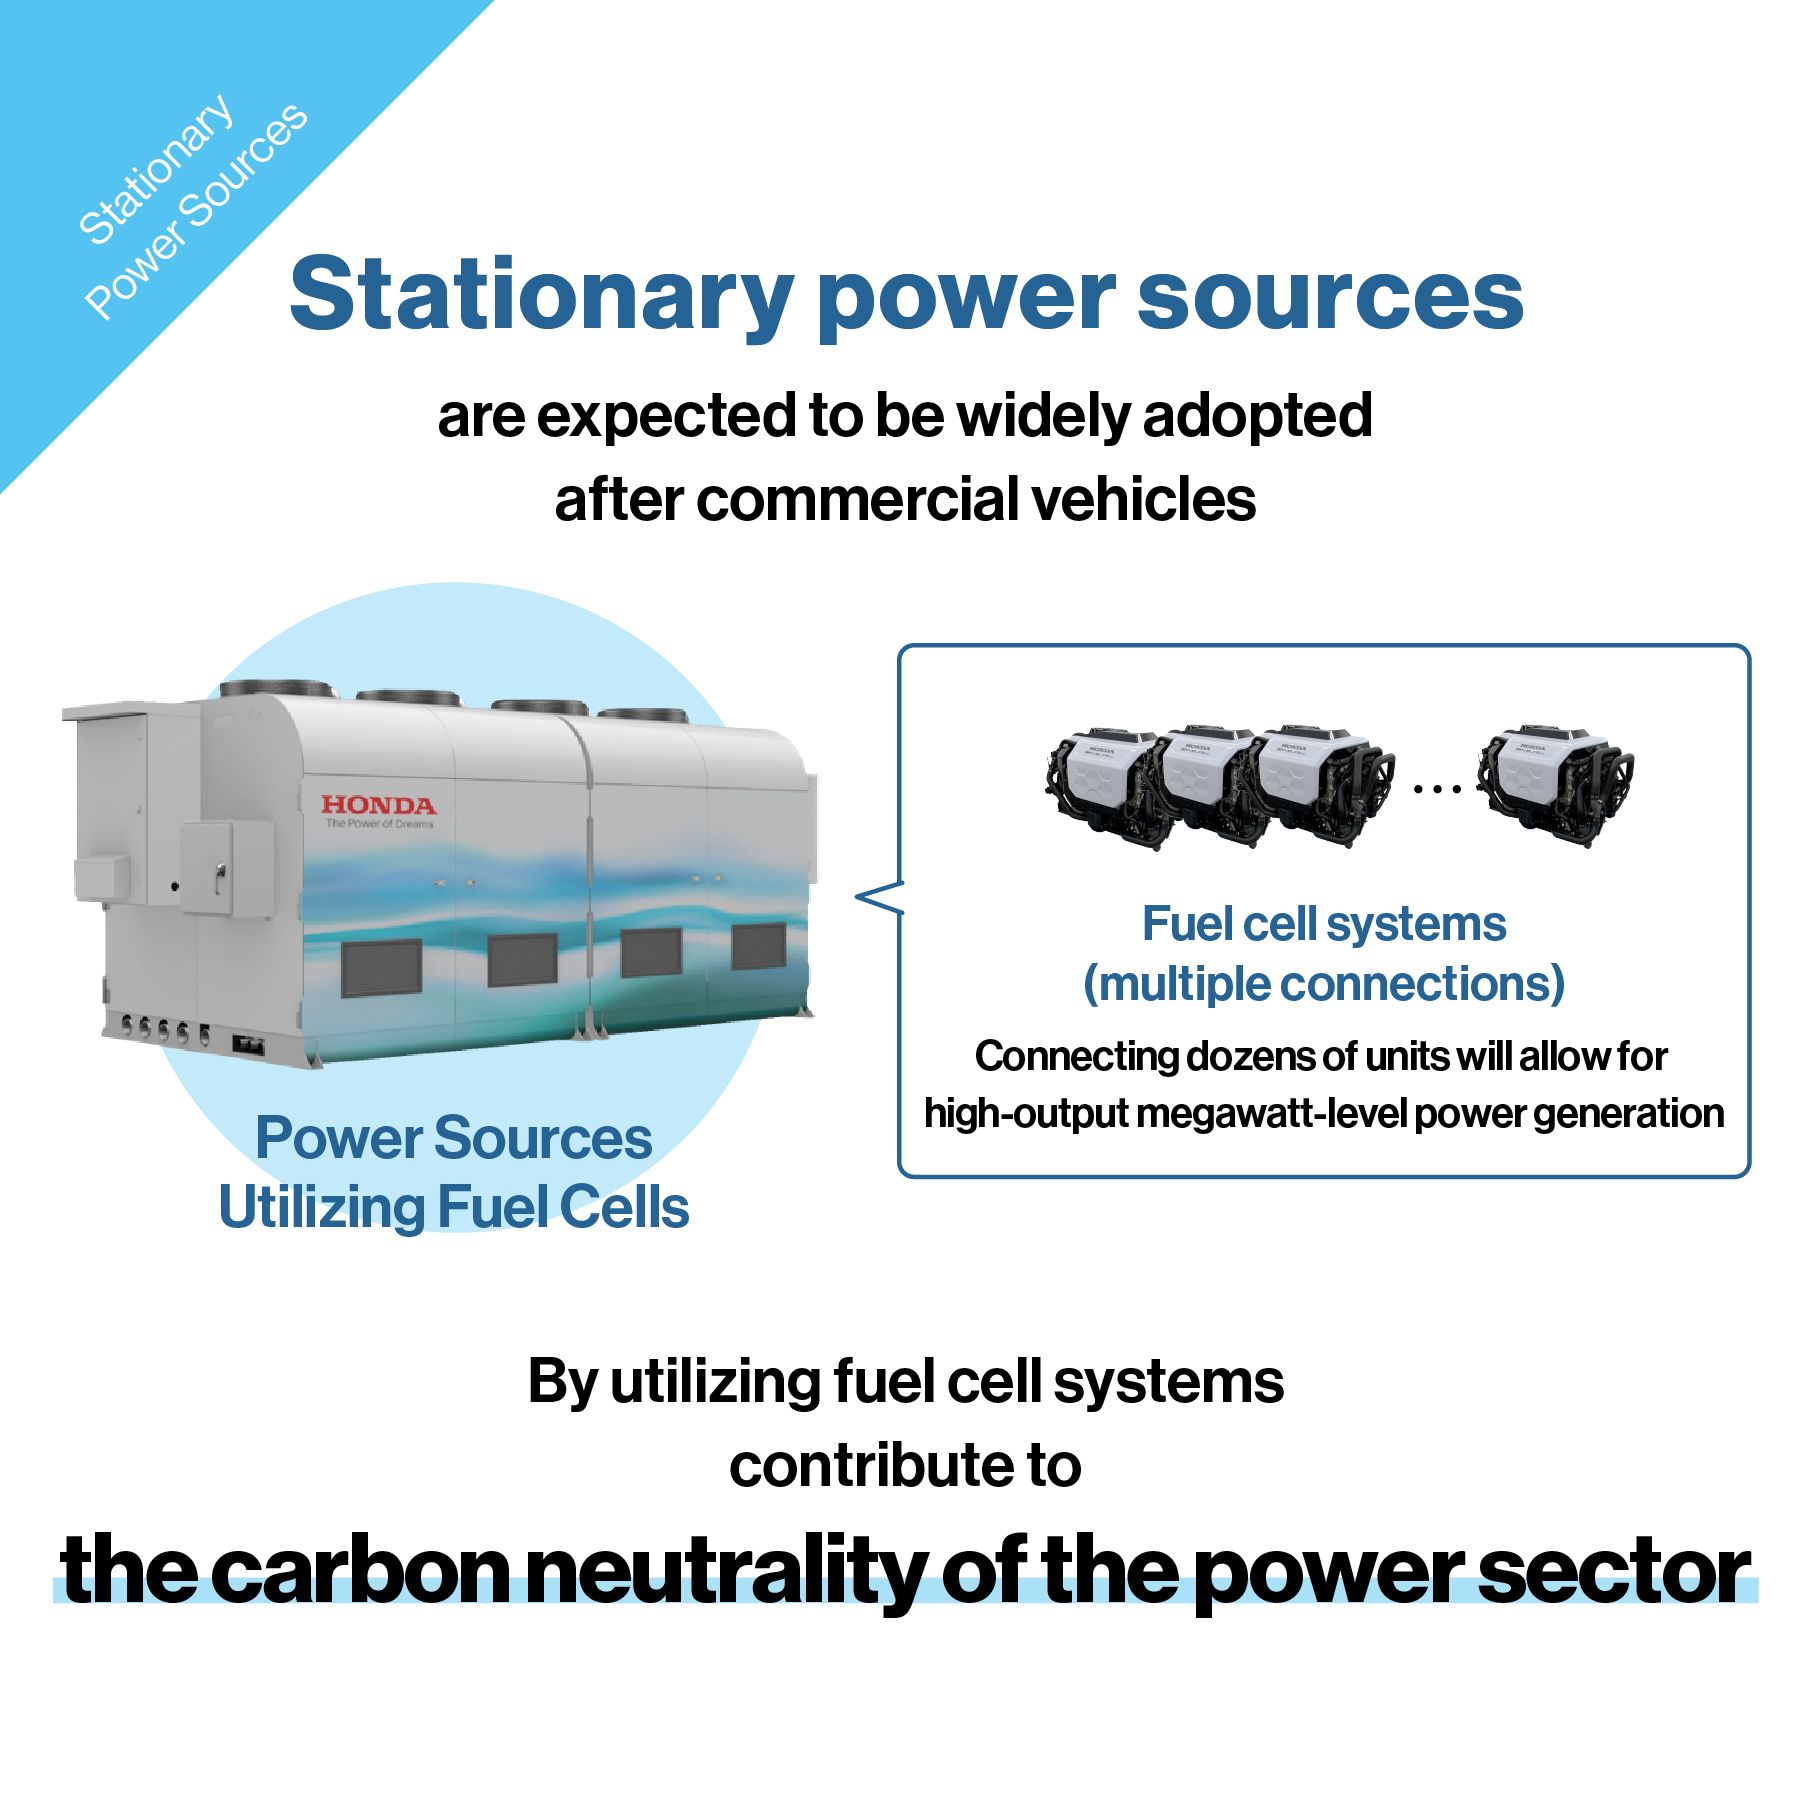 Contributing to the carbon neutrality of the power sector by utilizing fuel cell systems in stationary power sources